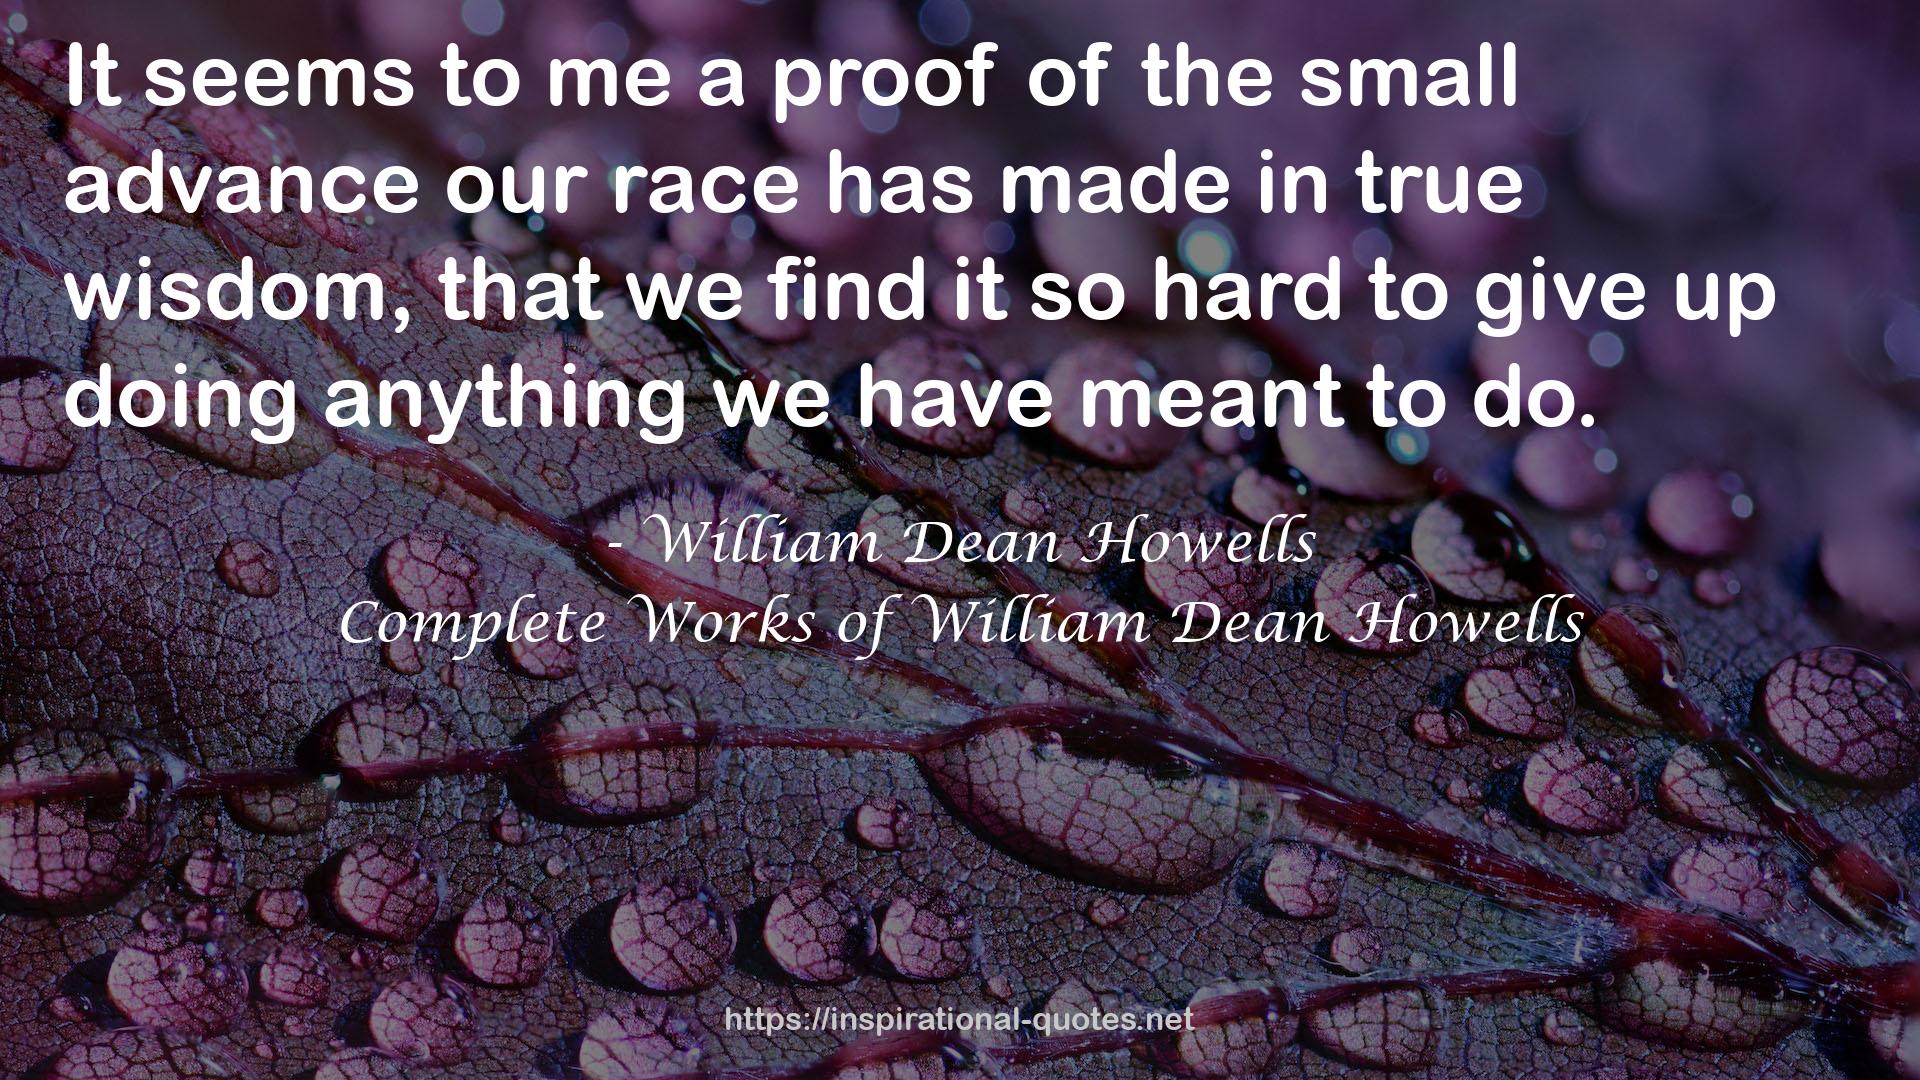 Complete Works of William Dean Howells QUOTES